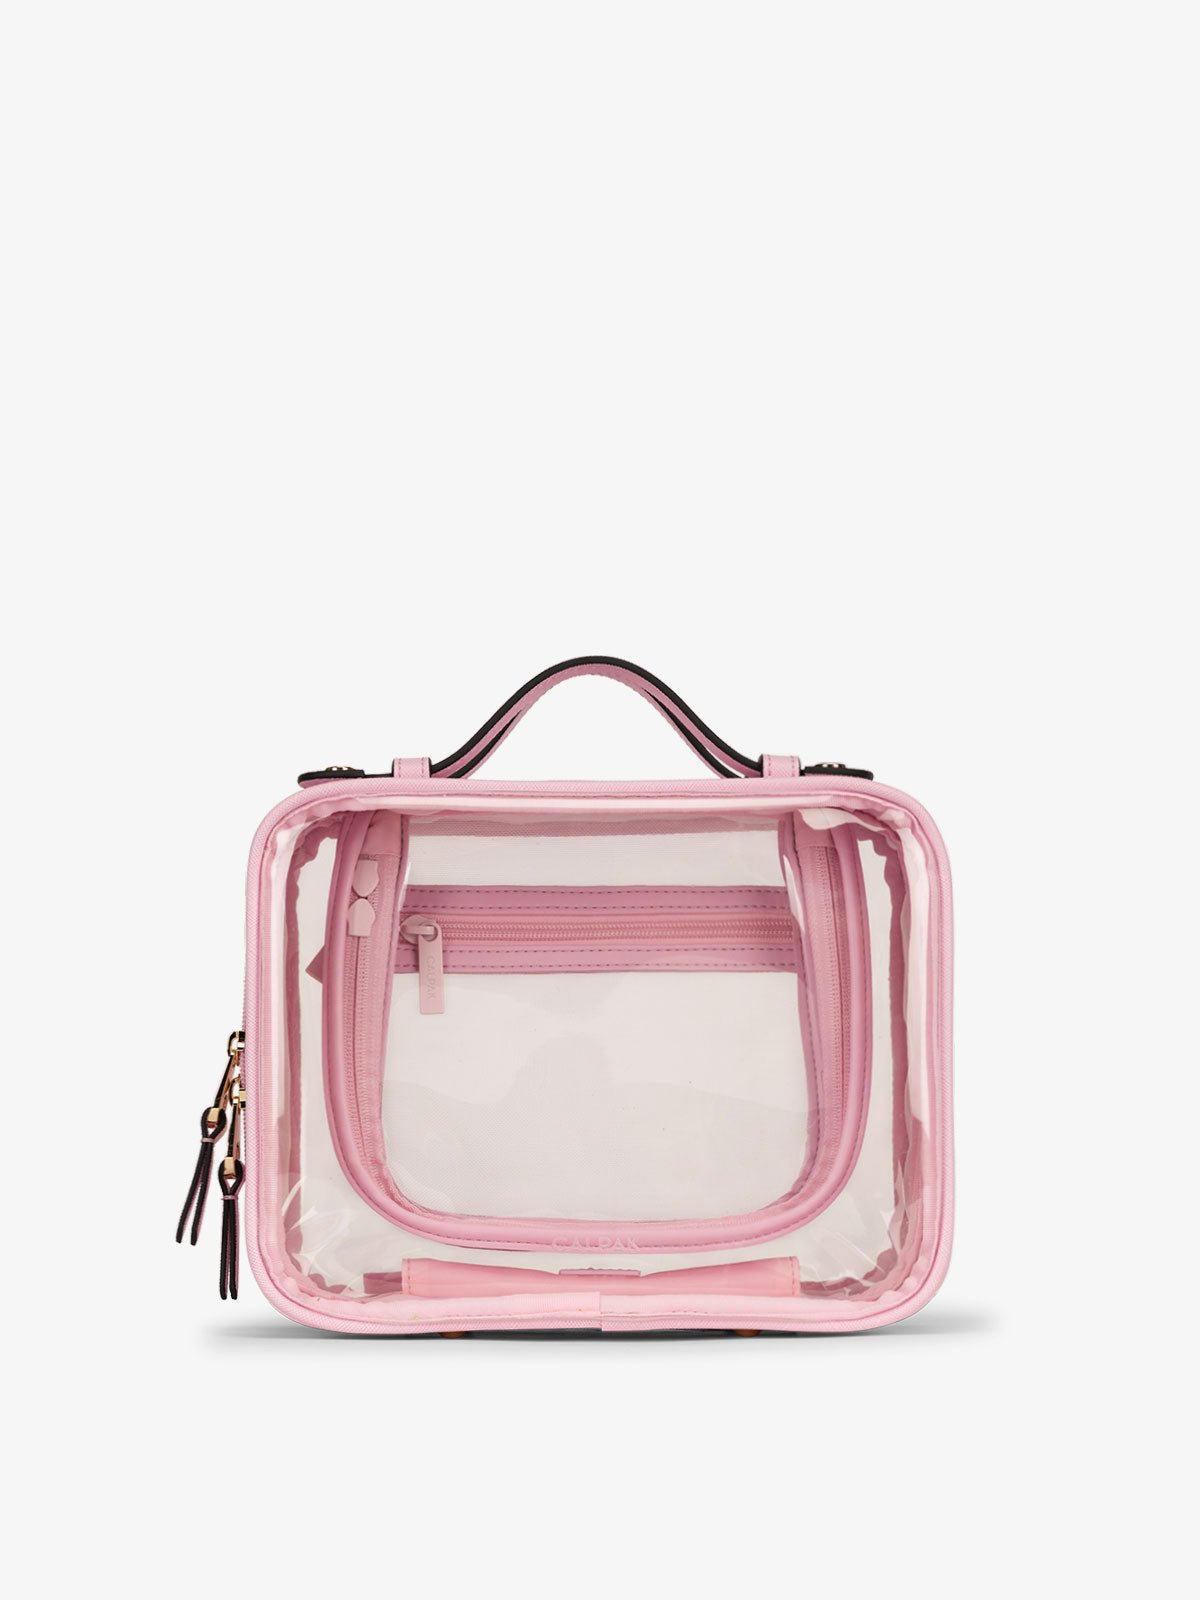 CALPAK Medium clear makeup bag with compartments in strawberry pink